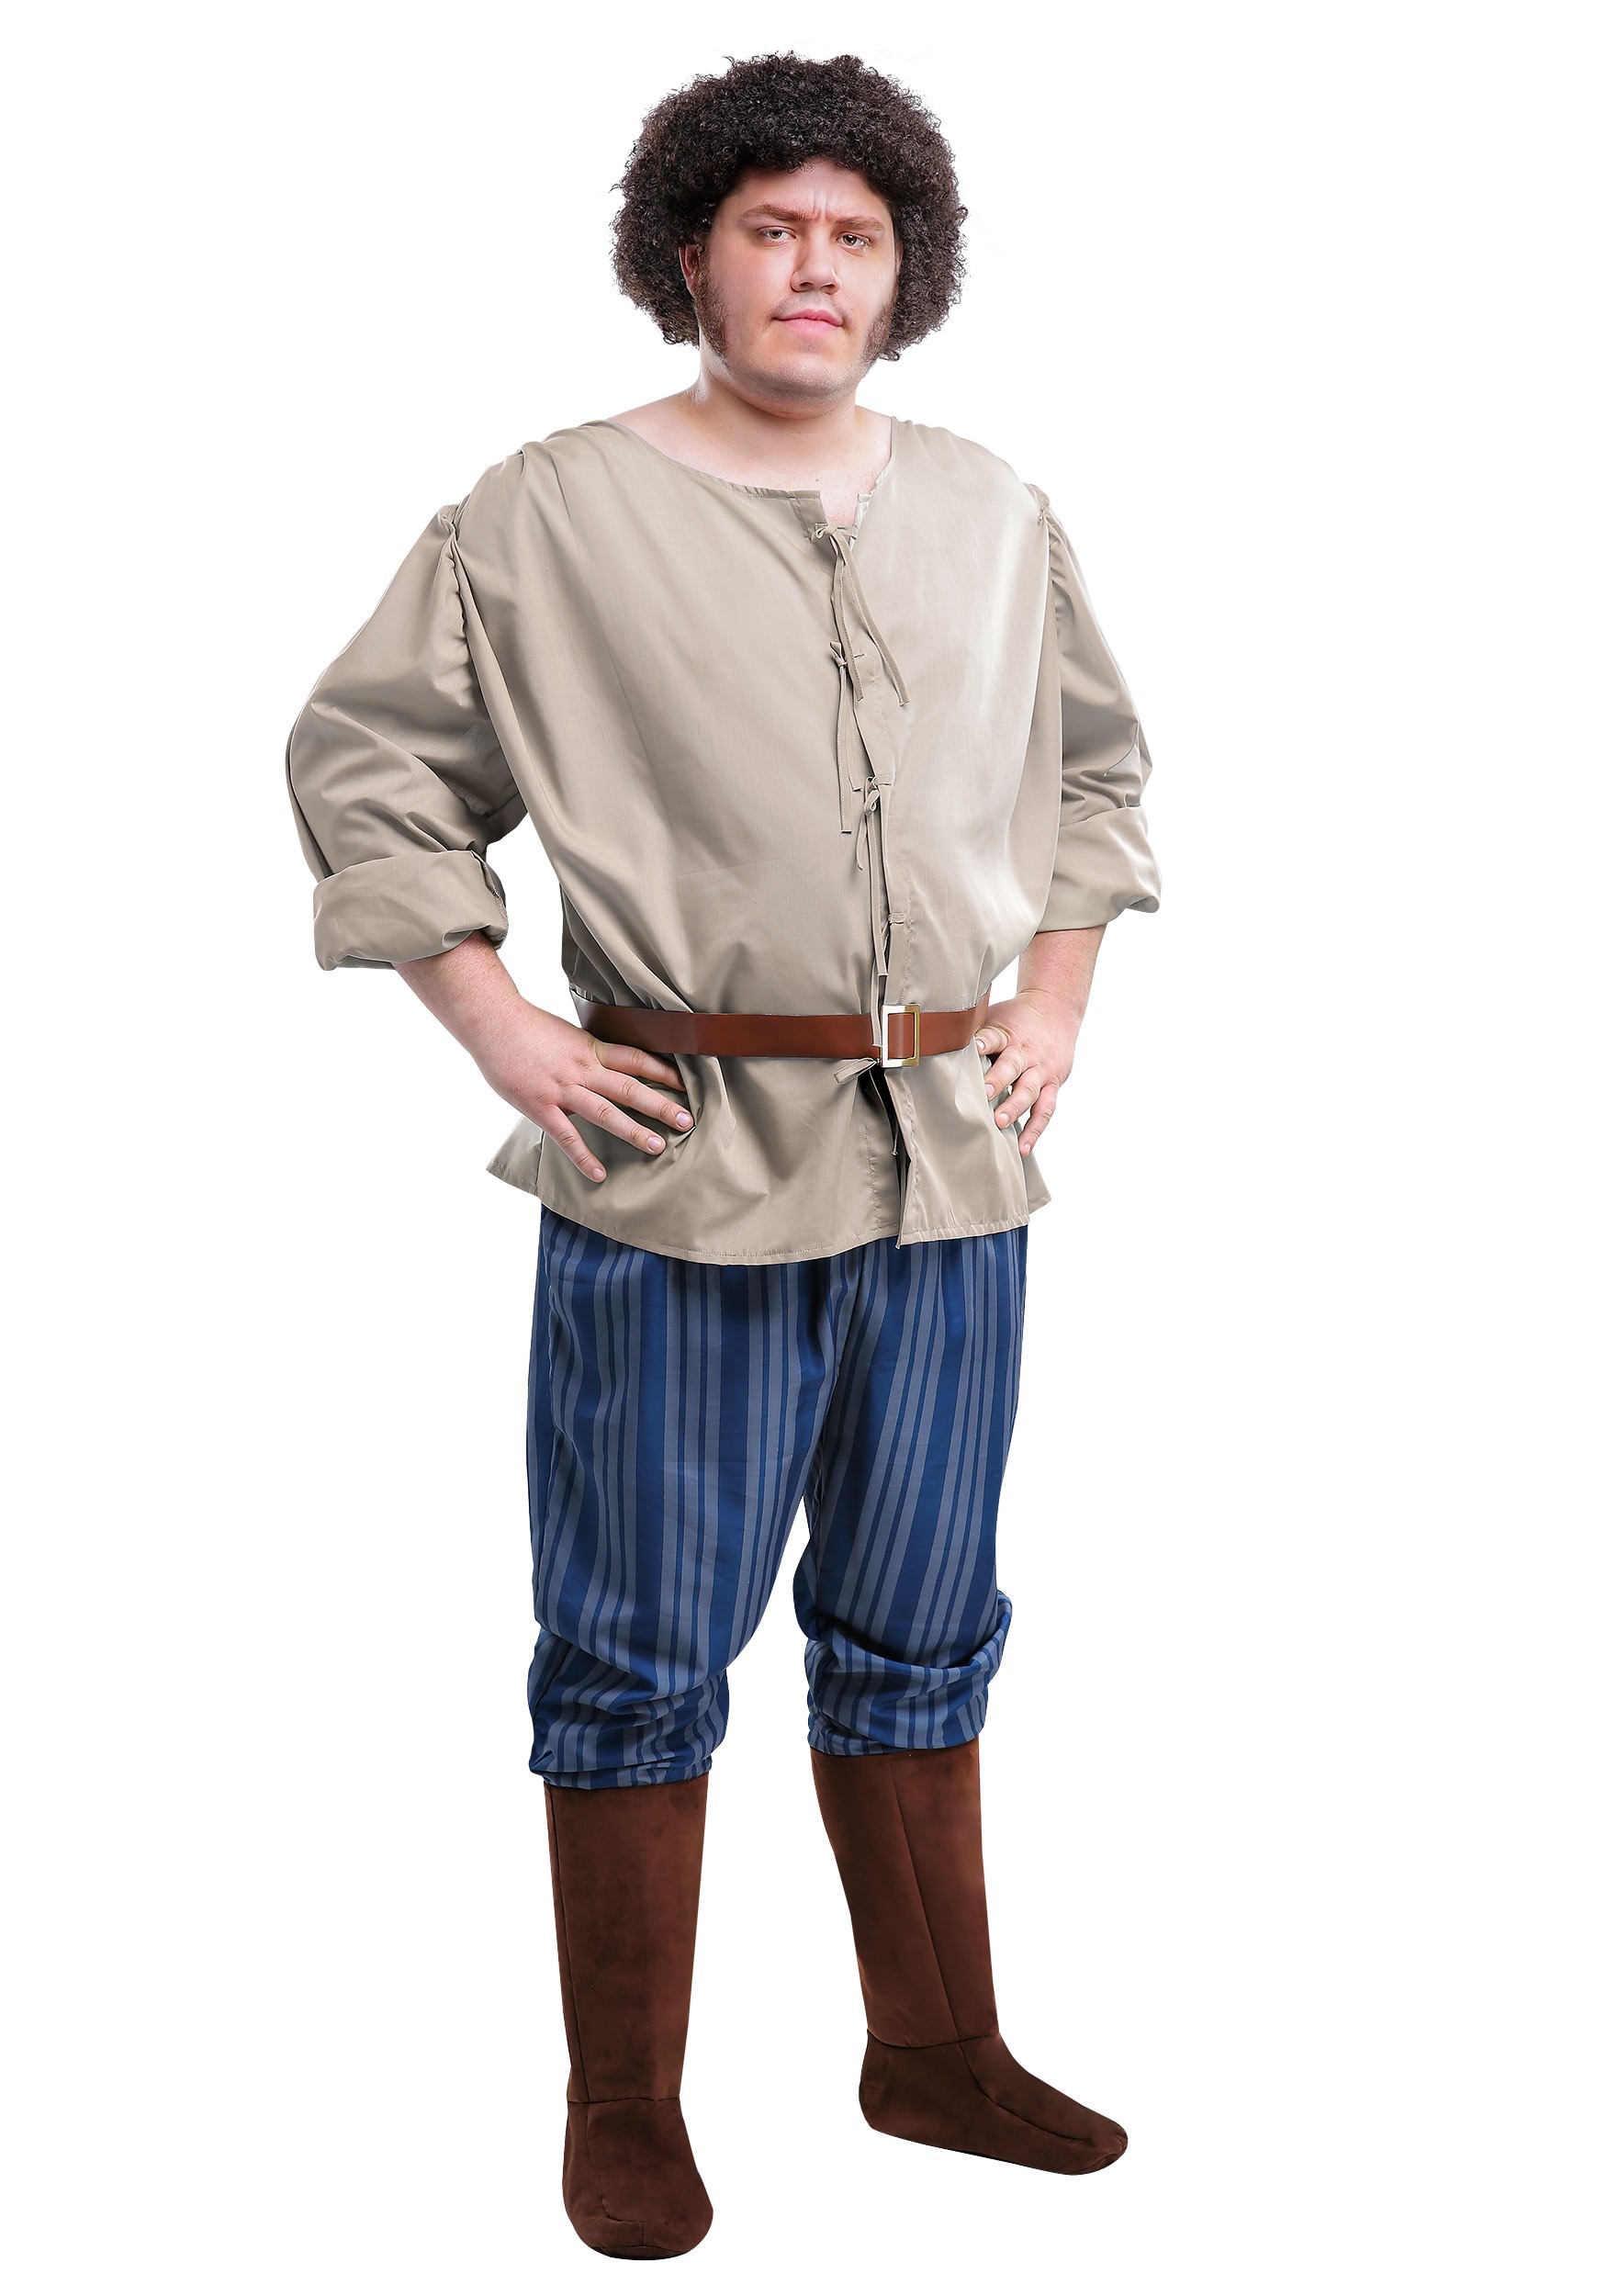 Fezzik Costume from The Princess Bride